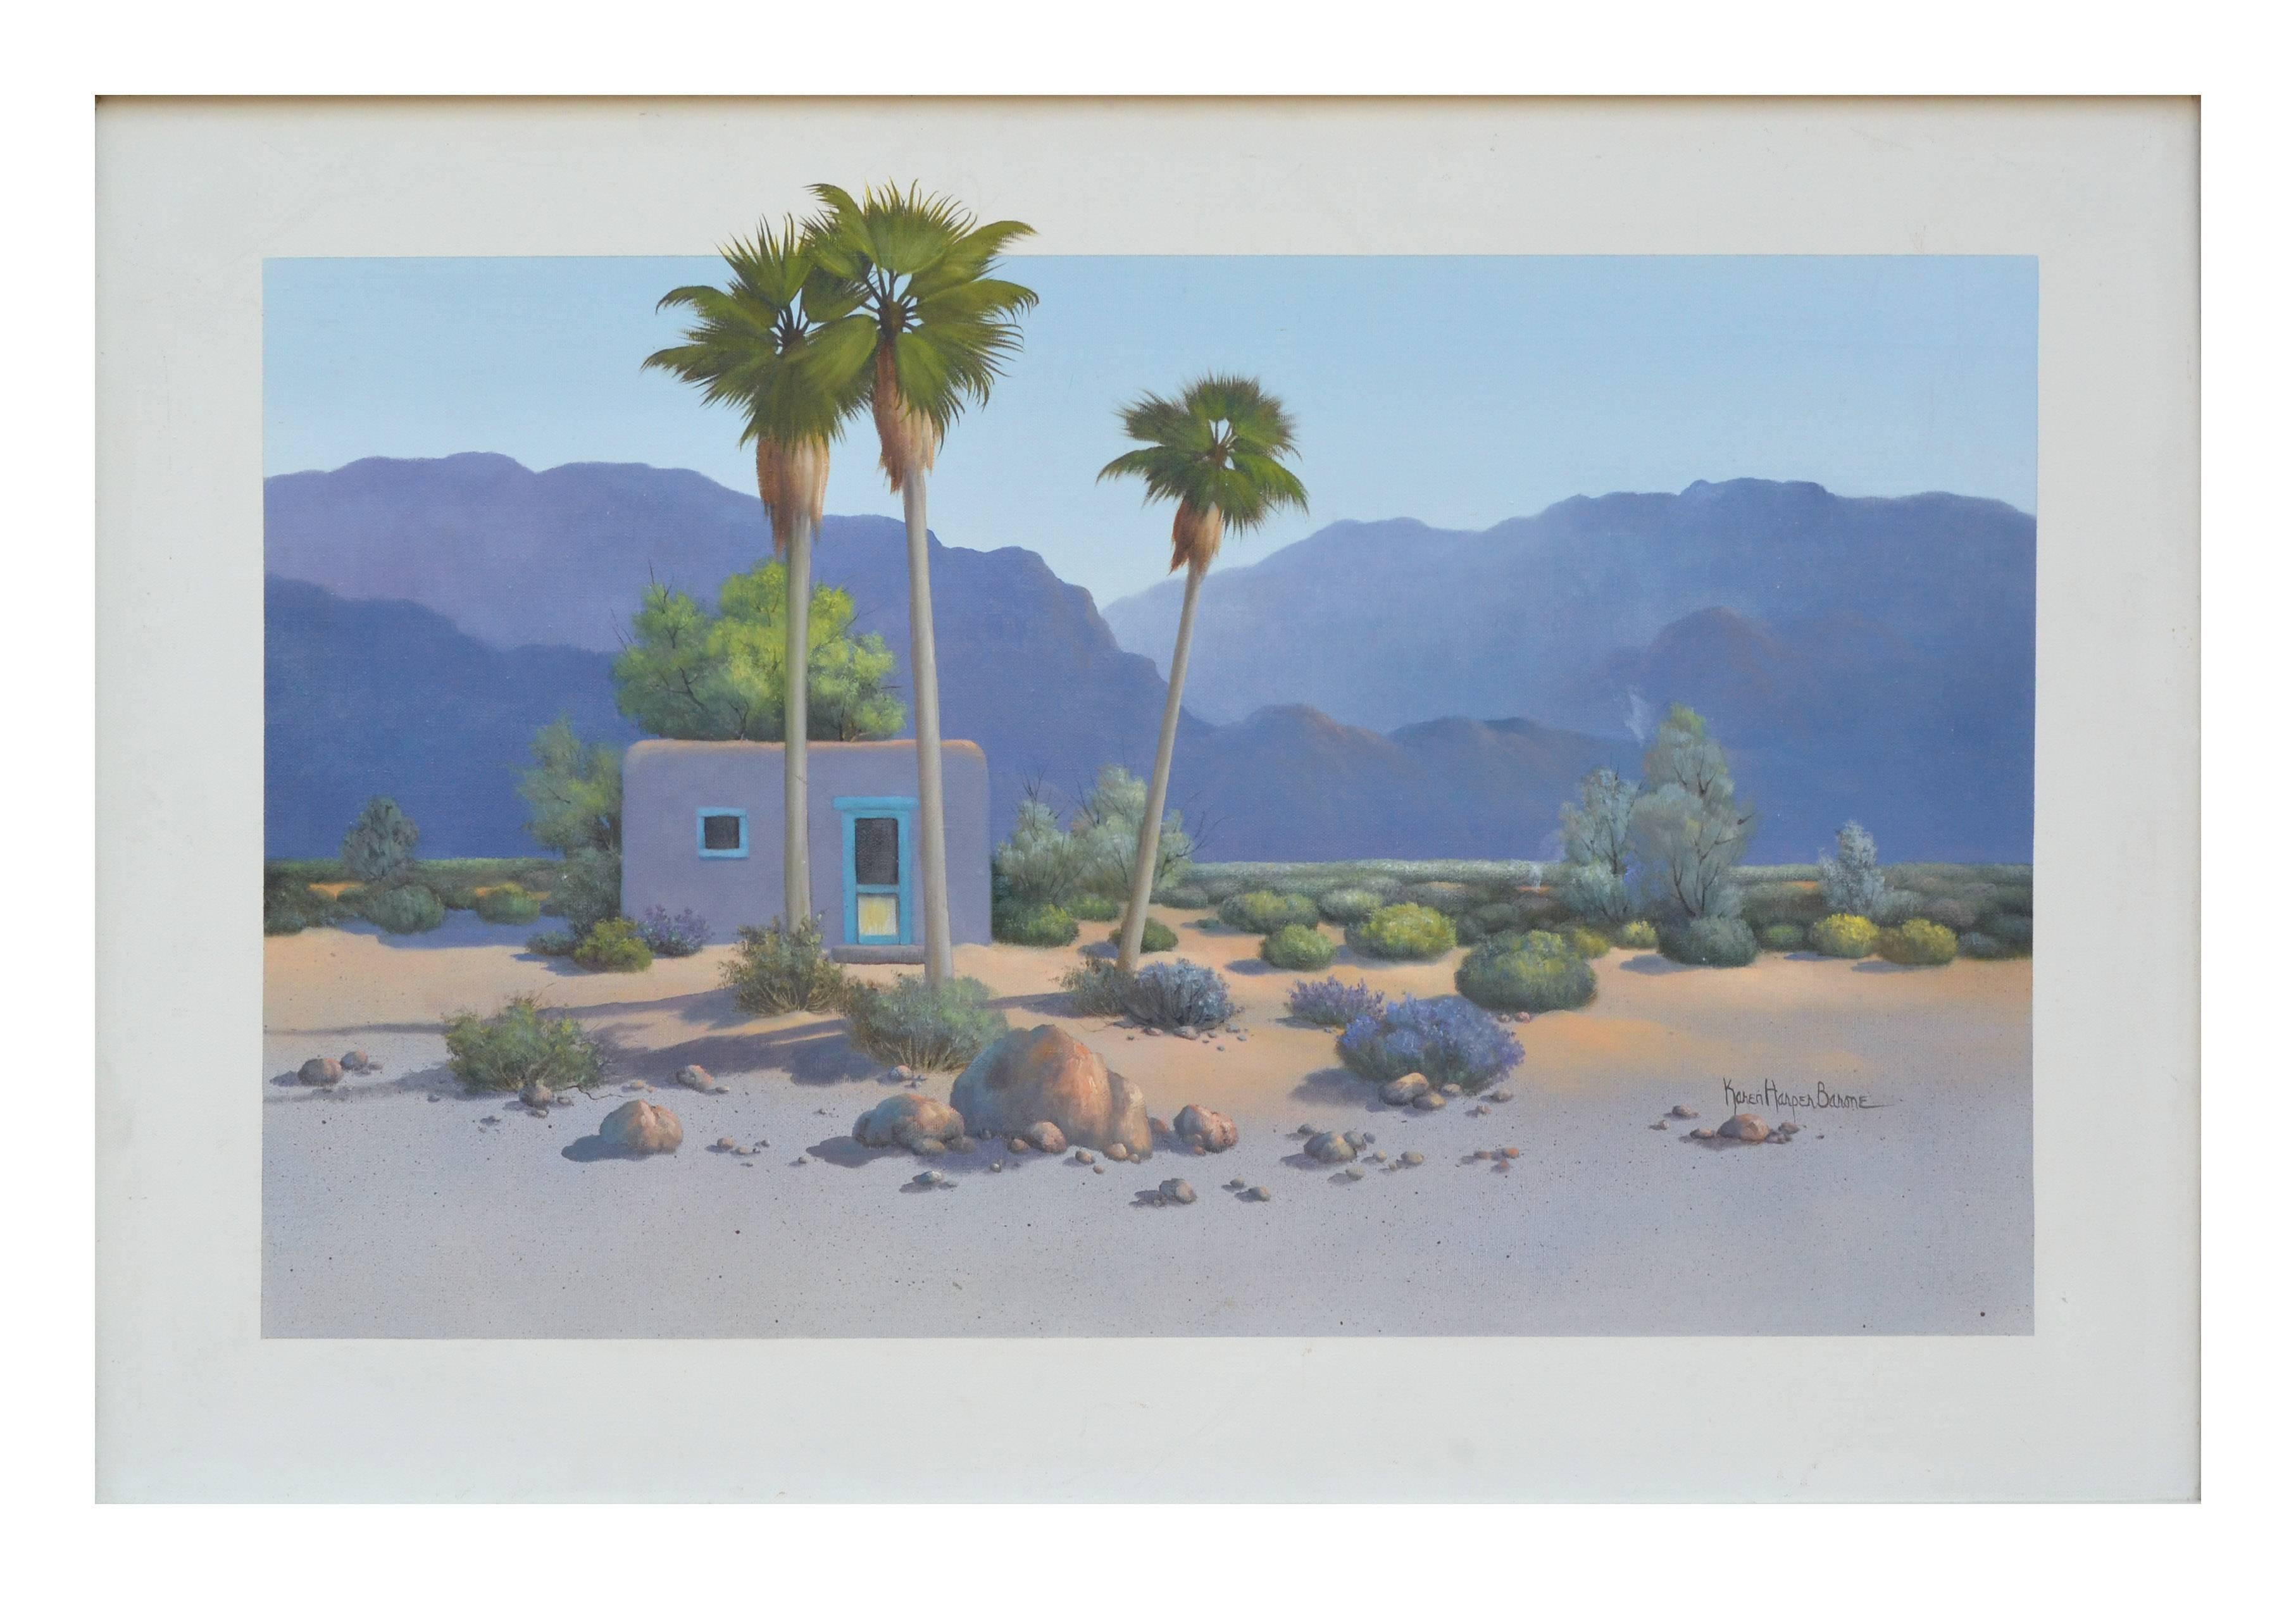 Adobe with Palm Trees - Painting by Karen Harper Barone